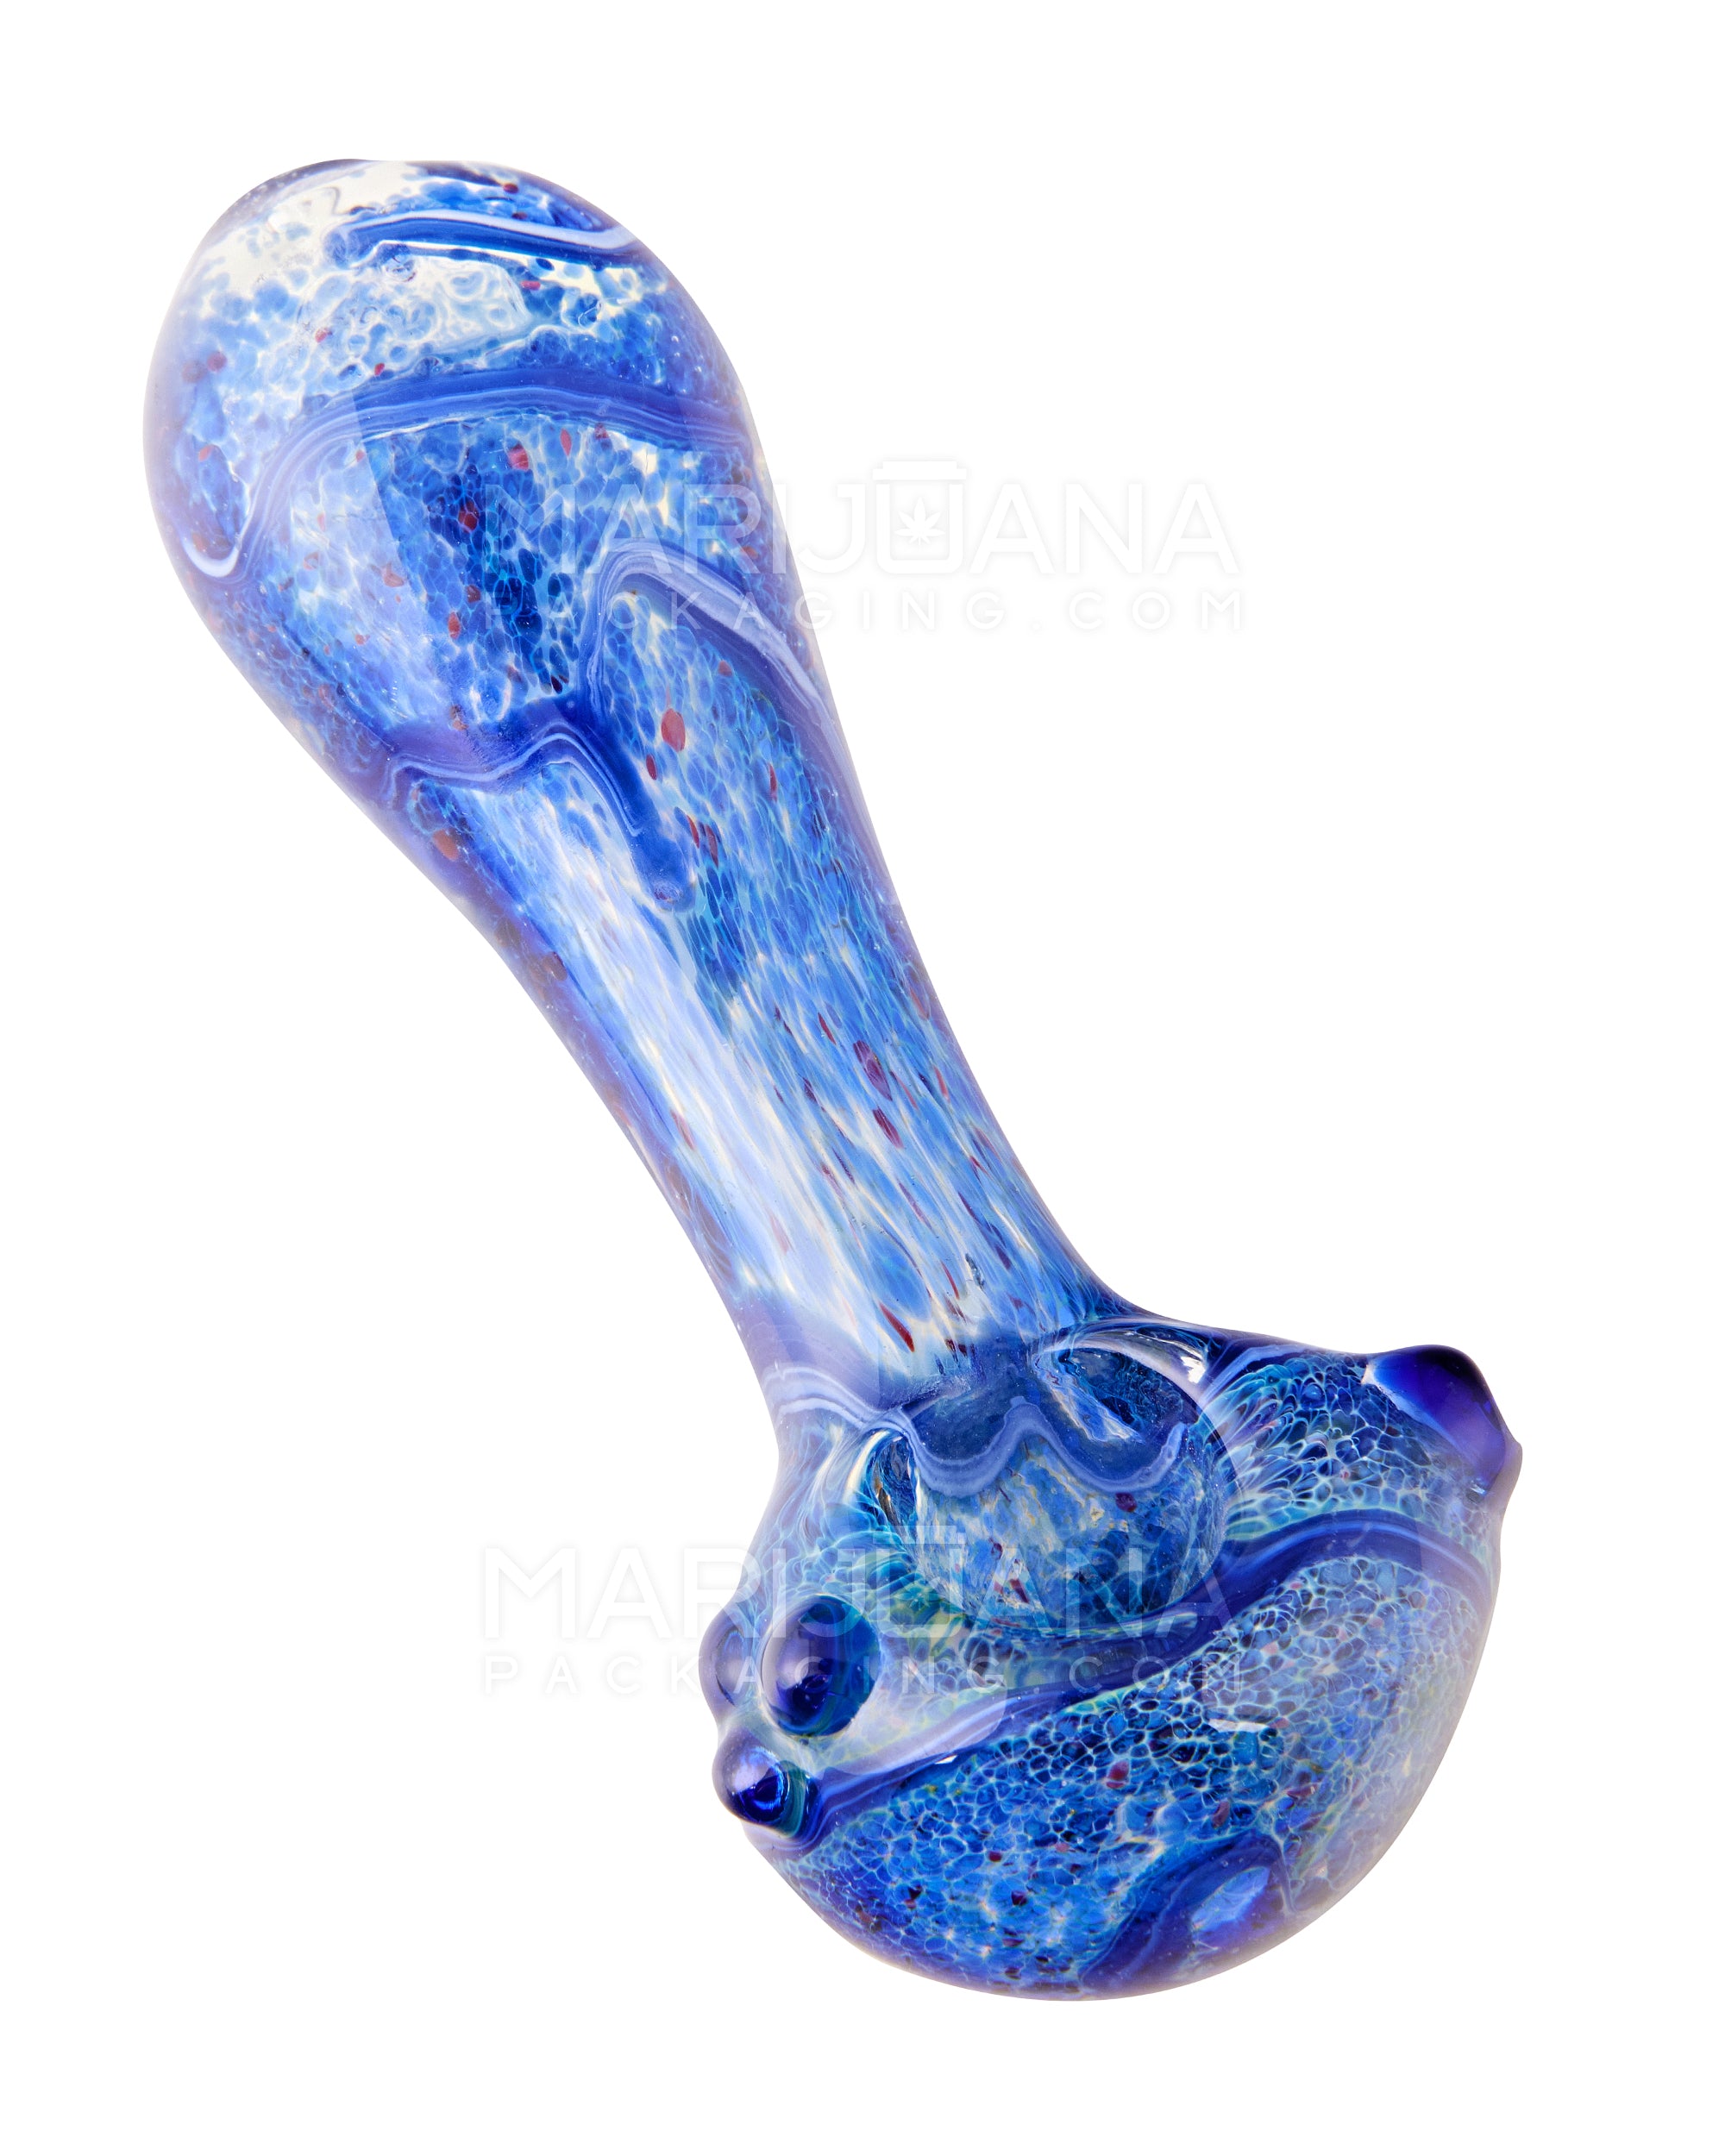 Frit & Fumed Spiral Spoon Hand Pipe w/ Triple Knockers | 4.5in Long - Glass - Assorted - 1